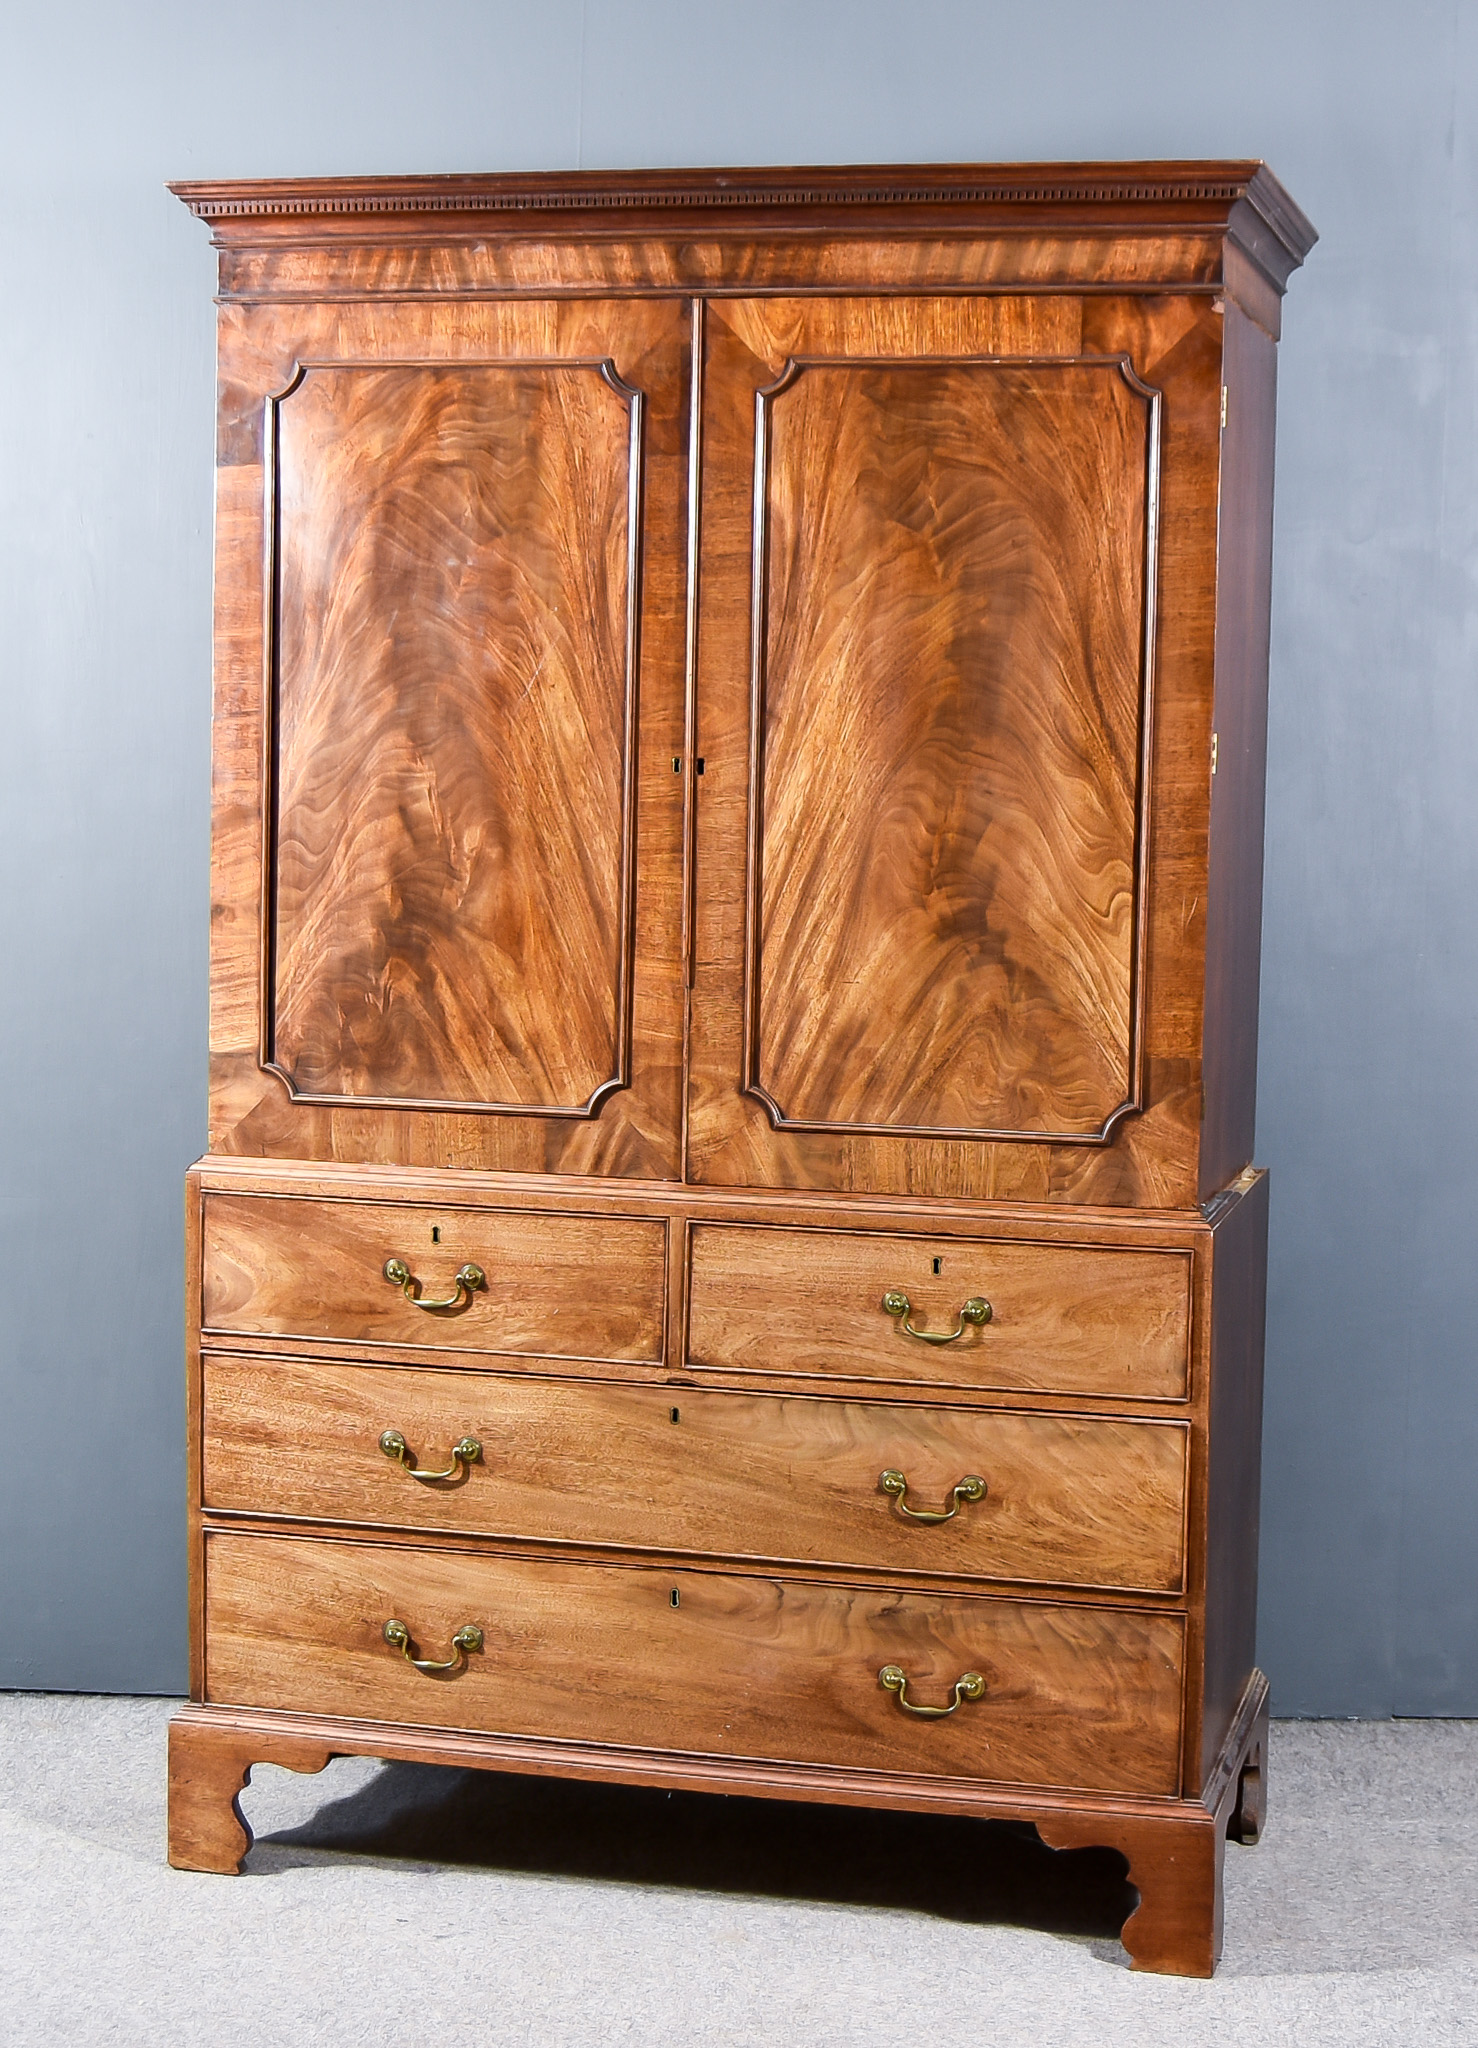 A George III Gentlemen's Mahogany Wardrobe, the upper part with moulded dentil cornice, fitted